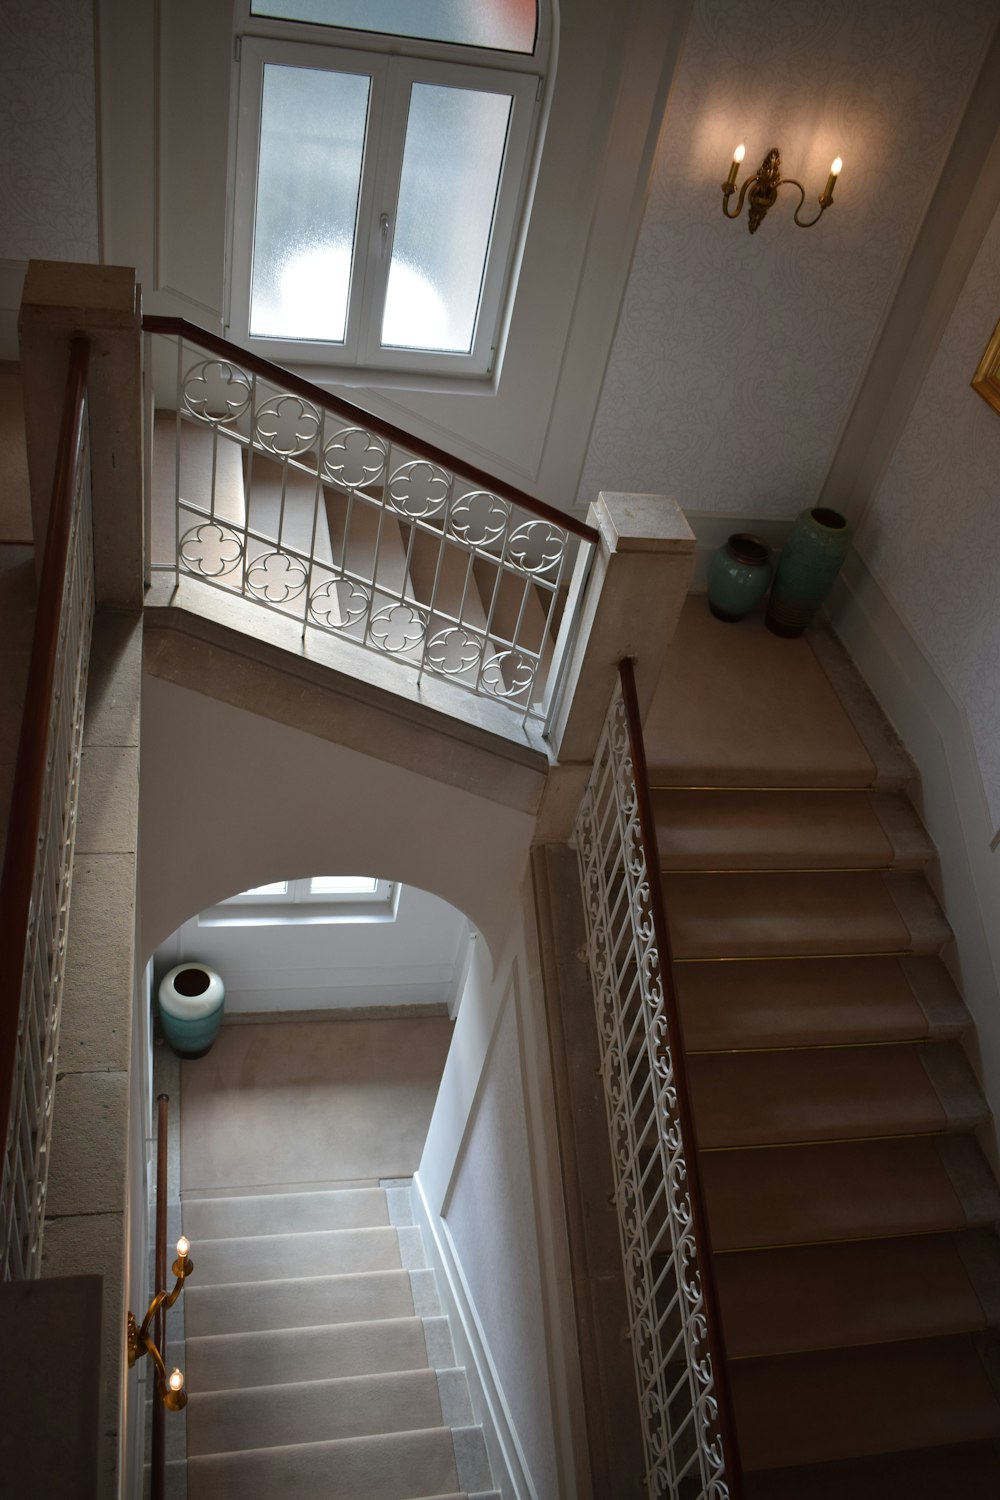 a view of a staircase from the top of the stairs